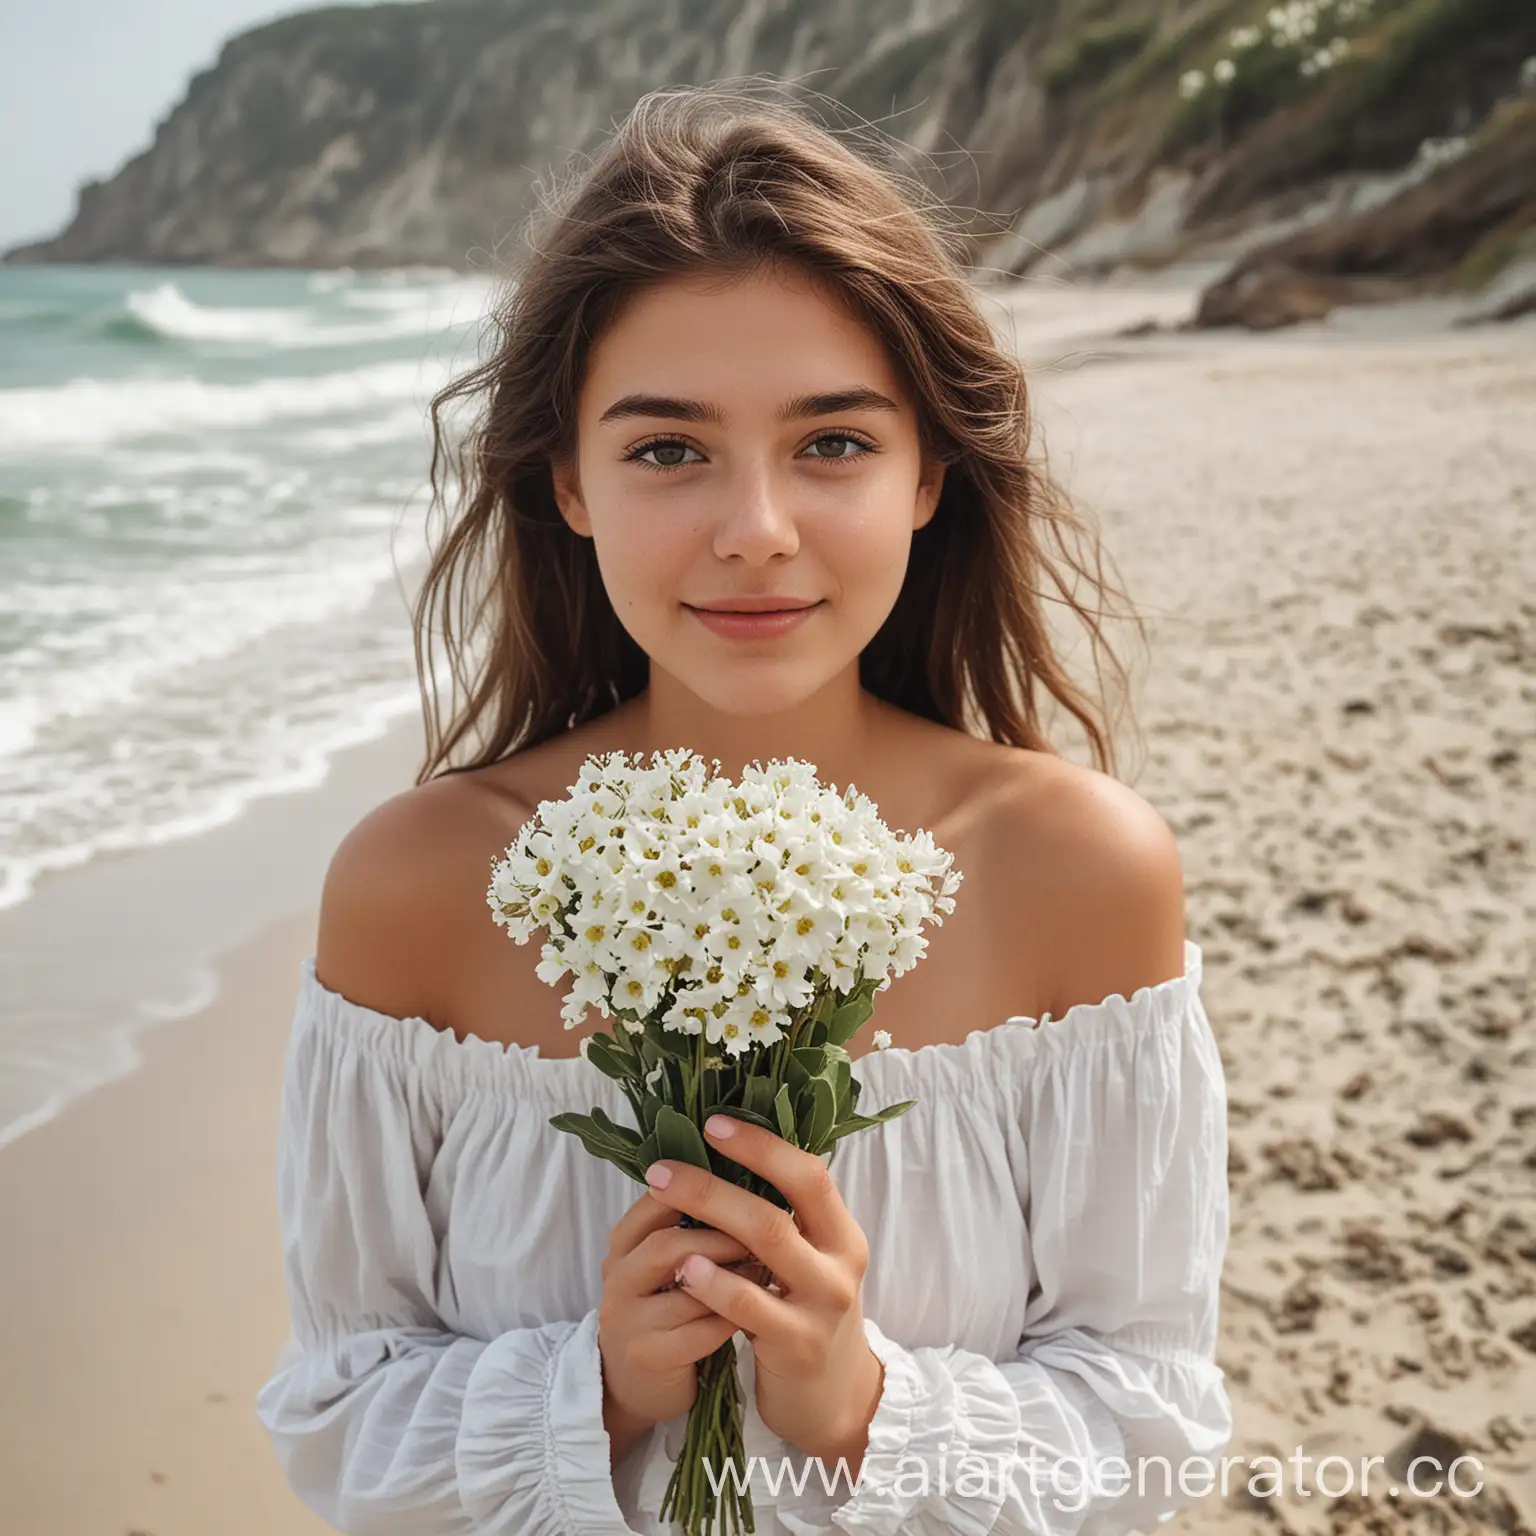 A 20-25 year OLD GIRL ON THE BEACH WITH WHITE FLOWERS IN HER HANDS